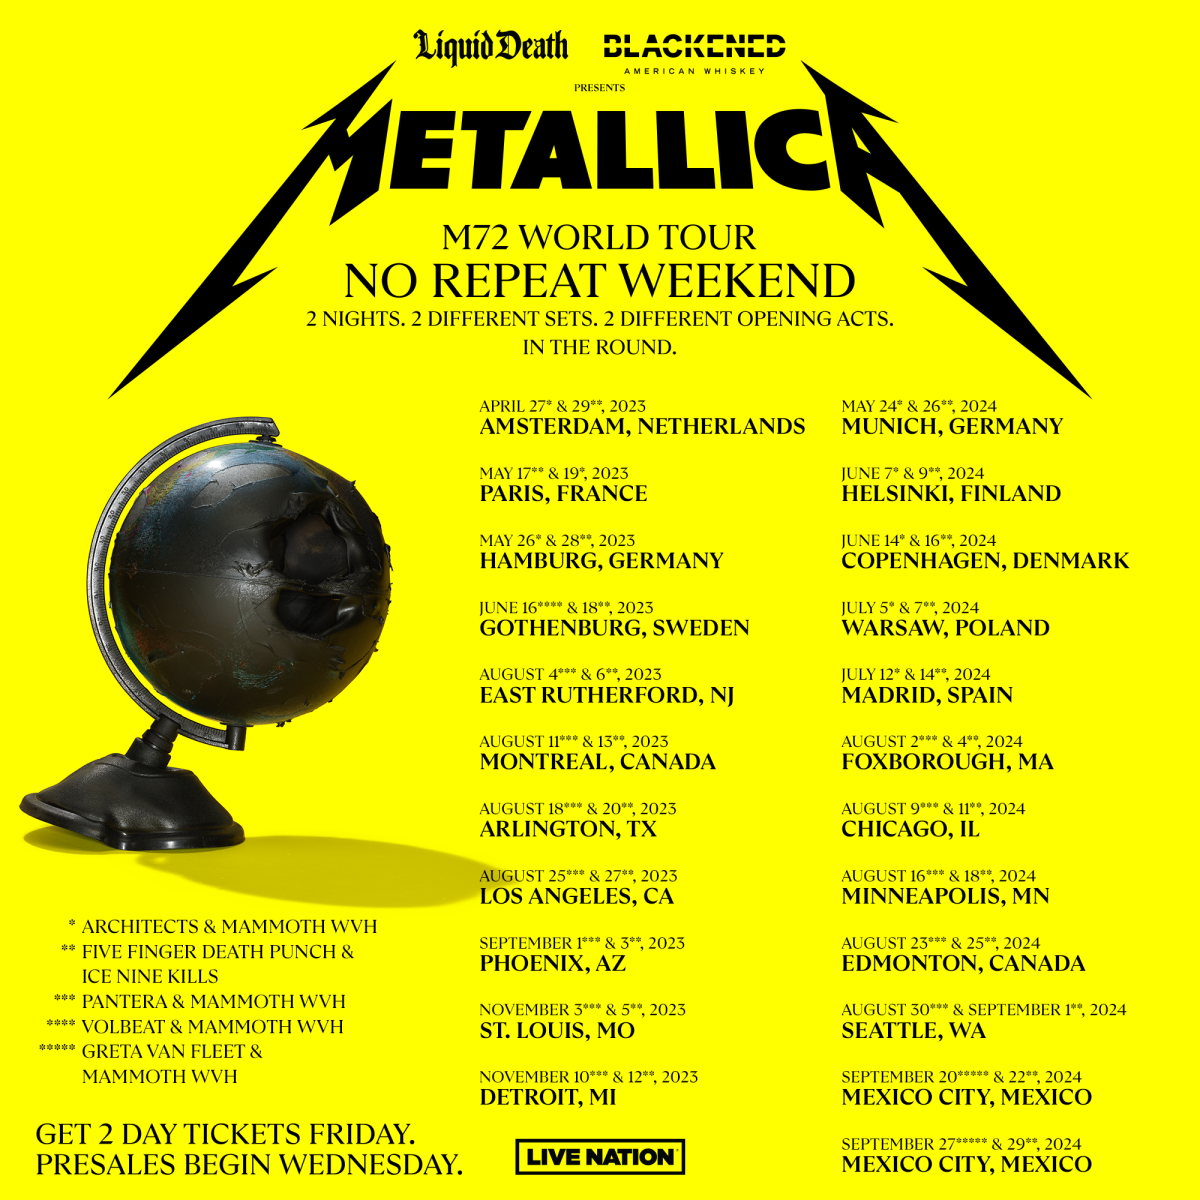 Metallica+spectacle+worth+the+wait